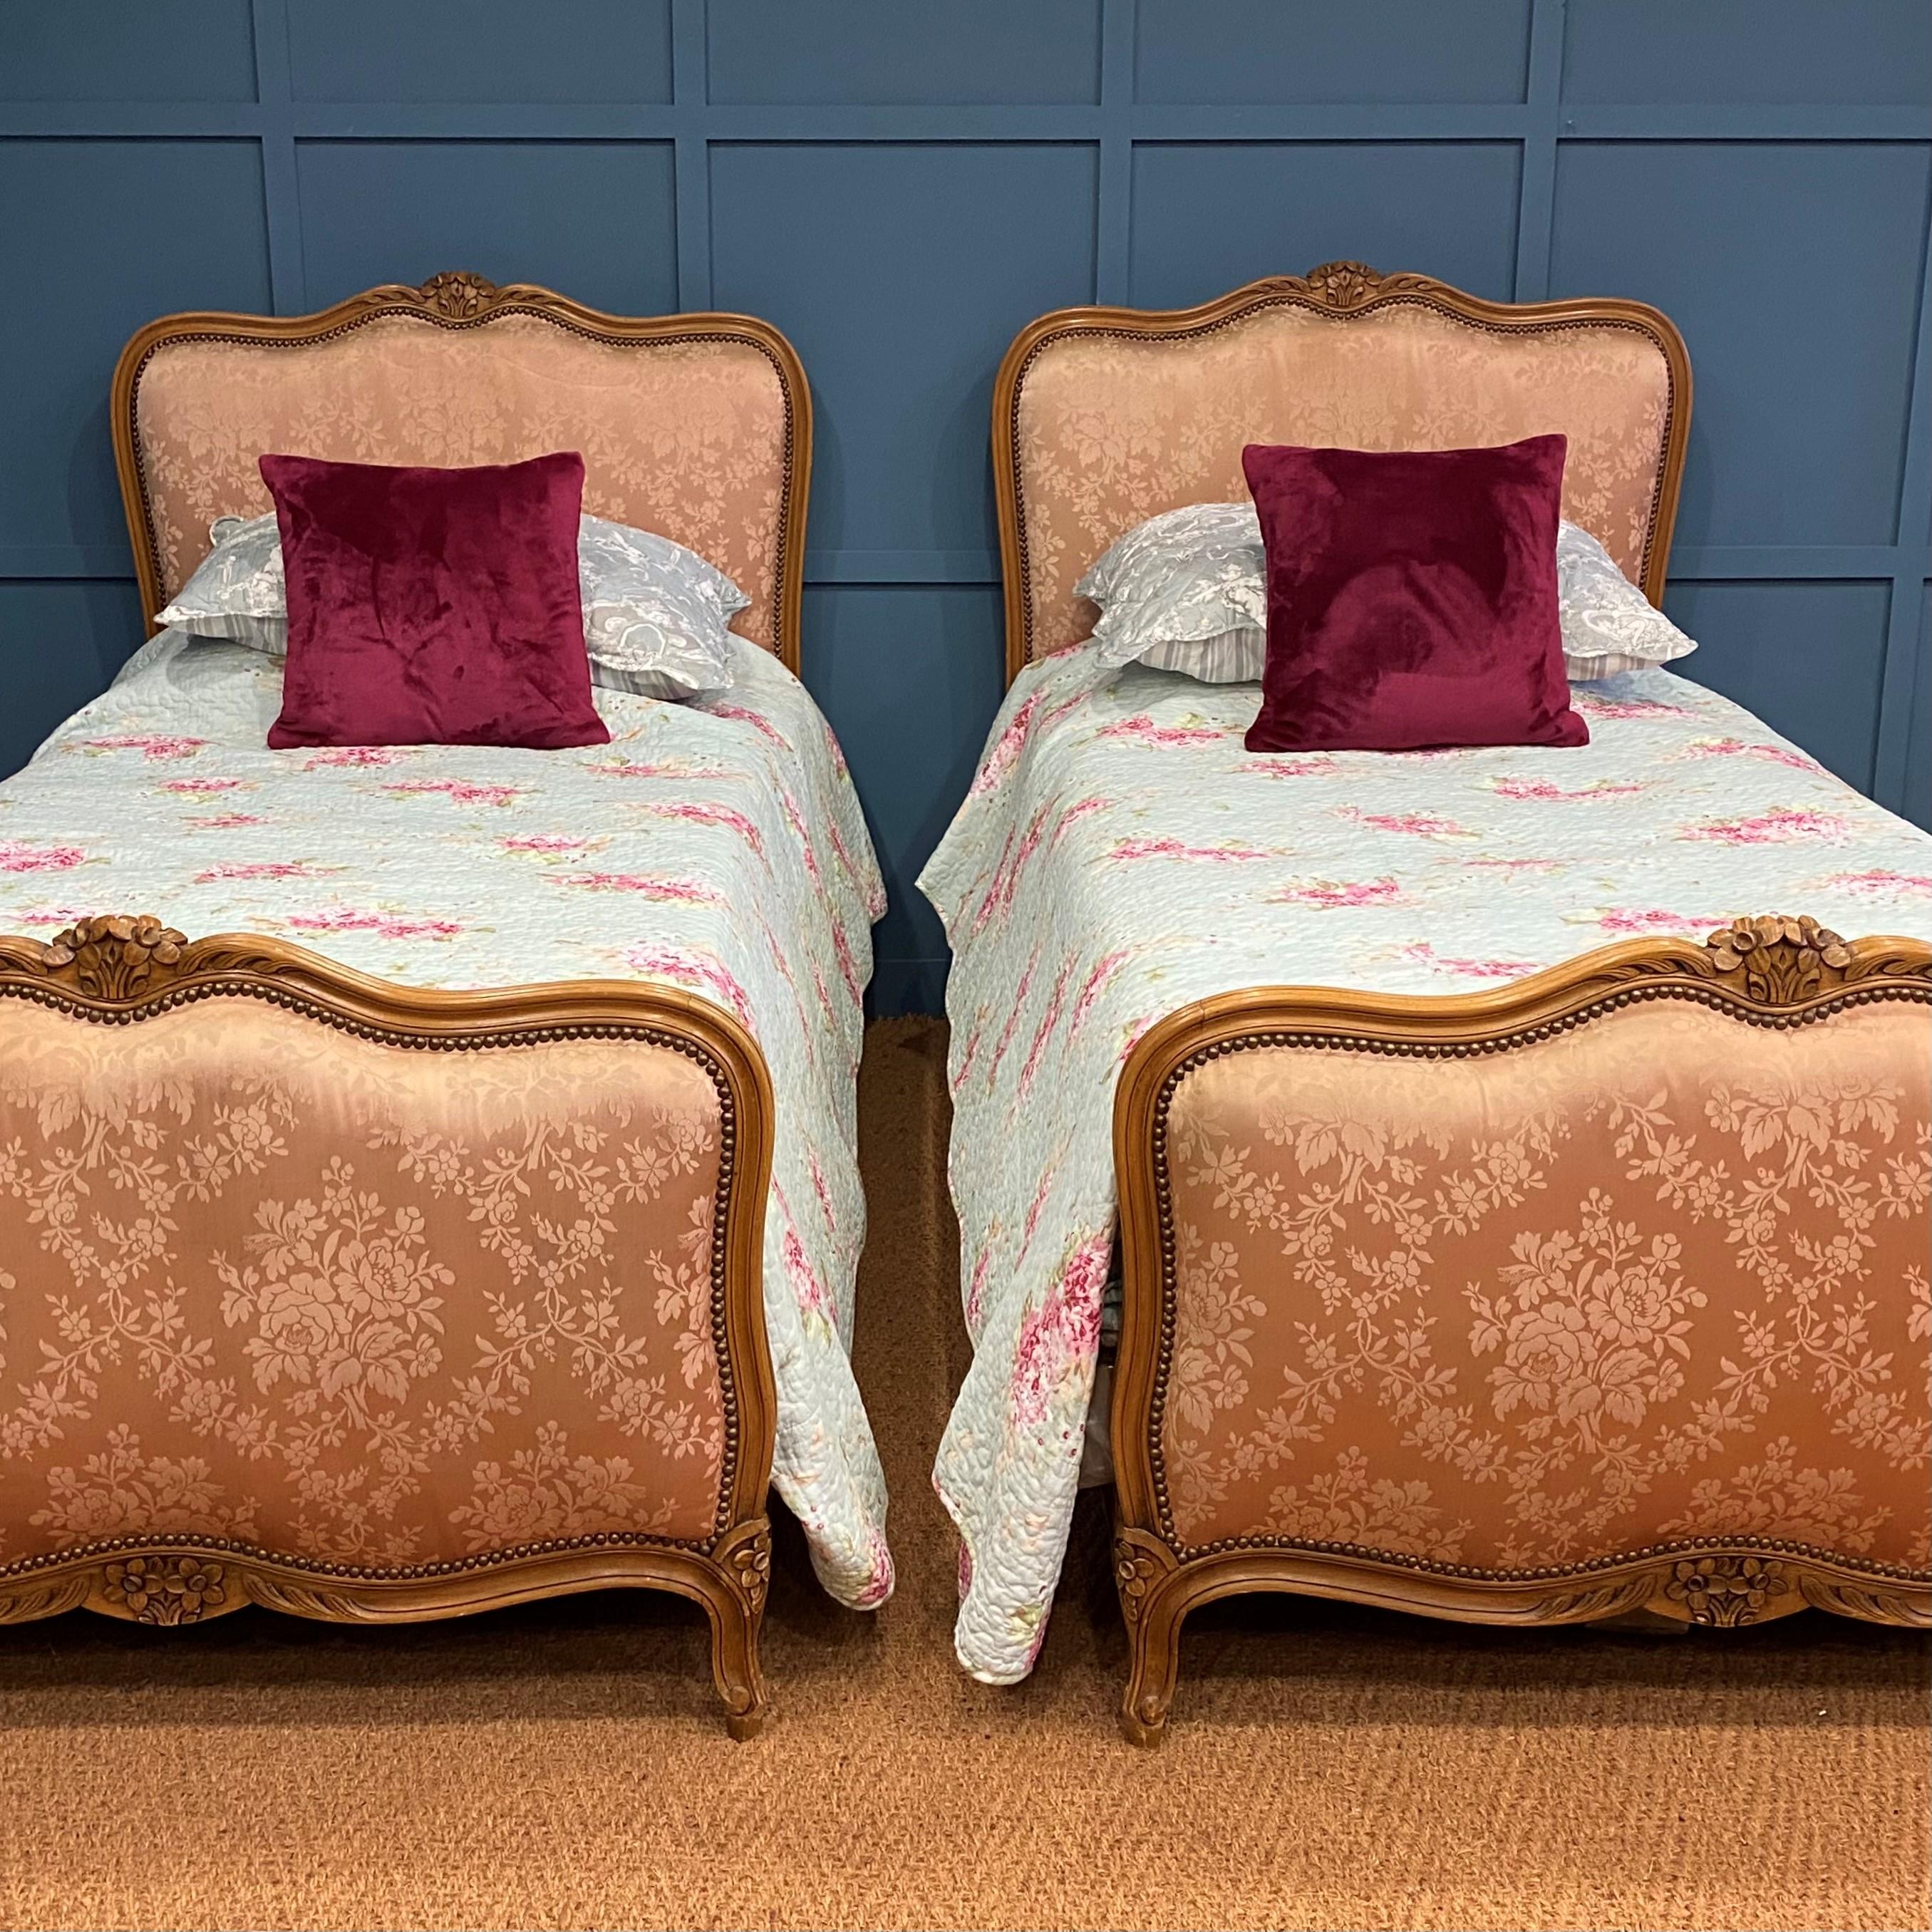 A matching pair of single 3’ French upholstered beds that are awaiting restoration. The beds will be fully restored to your choice of fabric. The frames can either be cleaned and polished or alternatively we could paint them to compliment the new